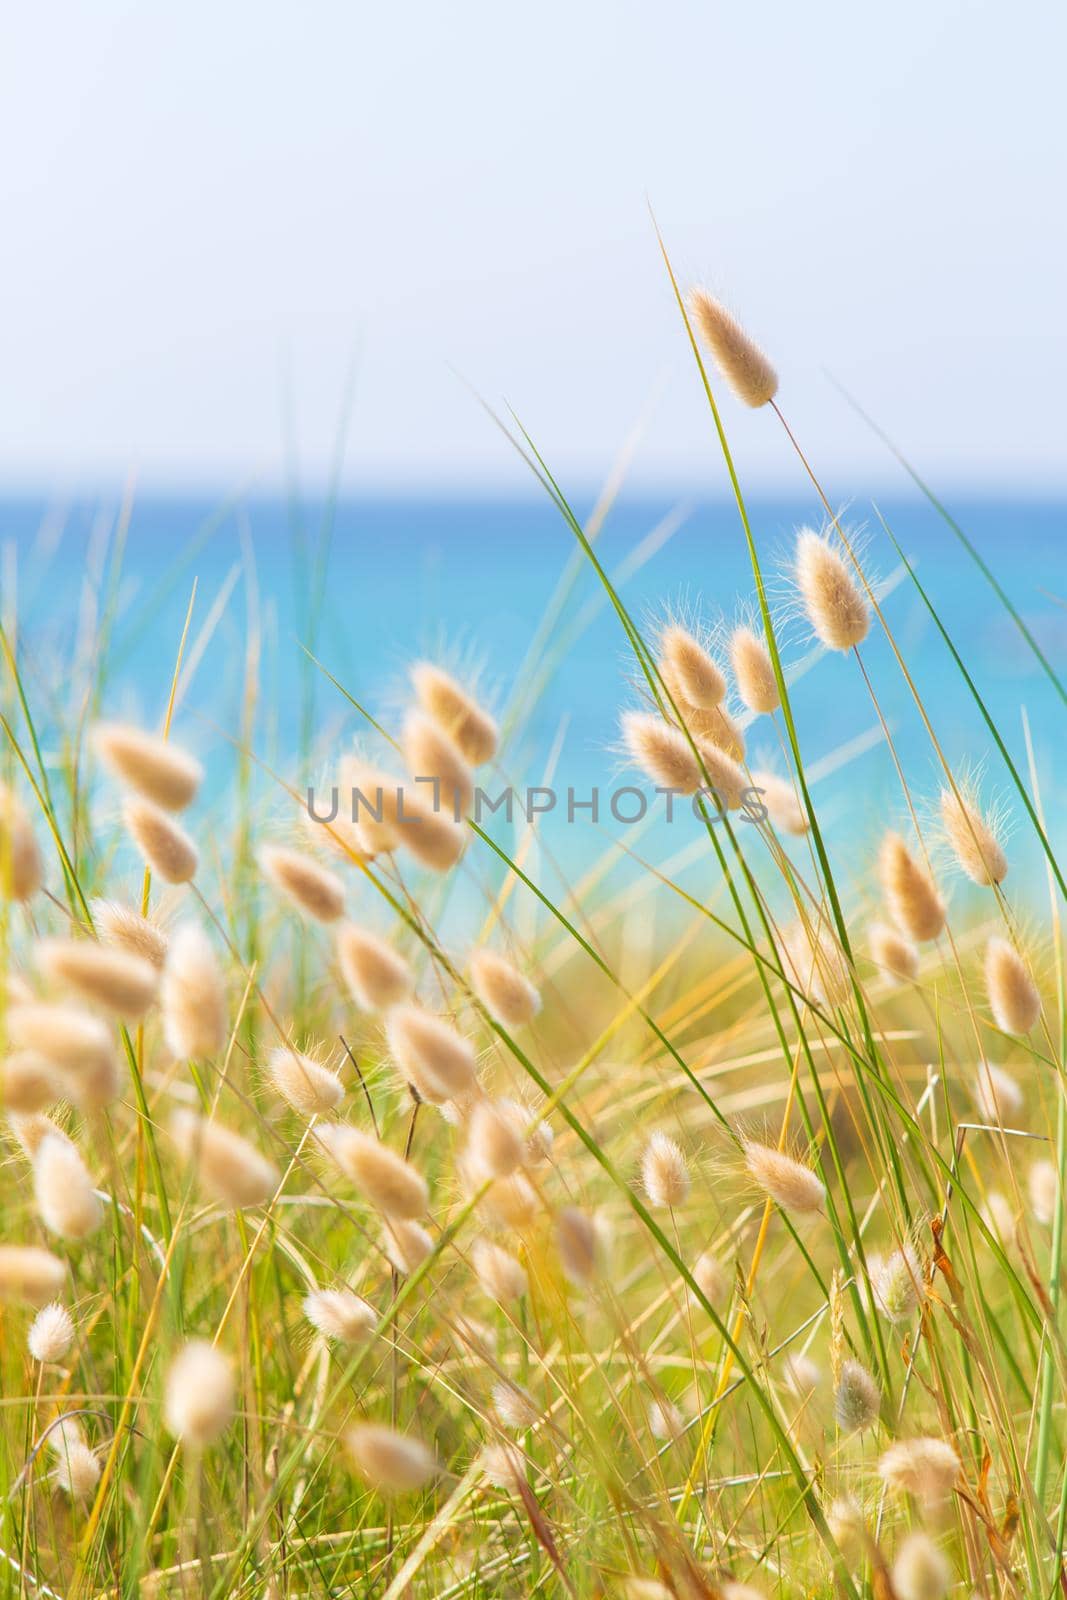 Bunny tails grass near the turquoise sea